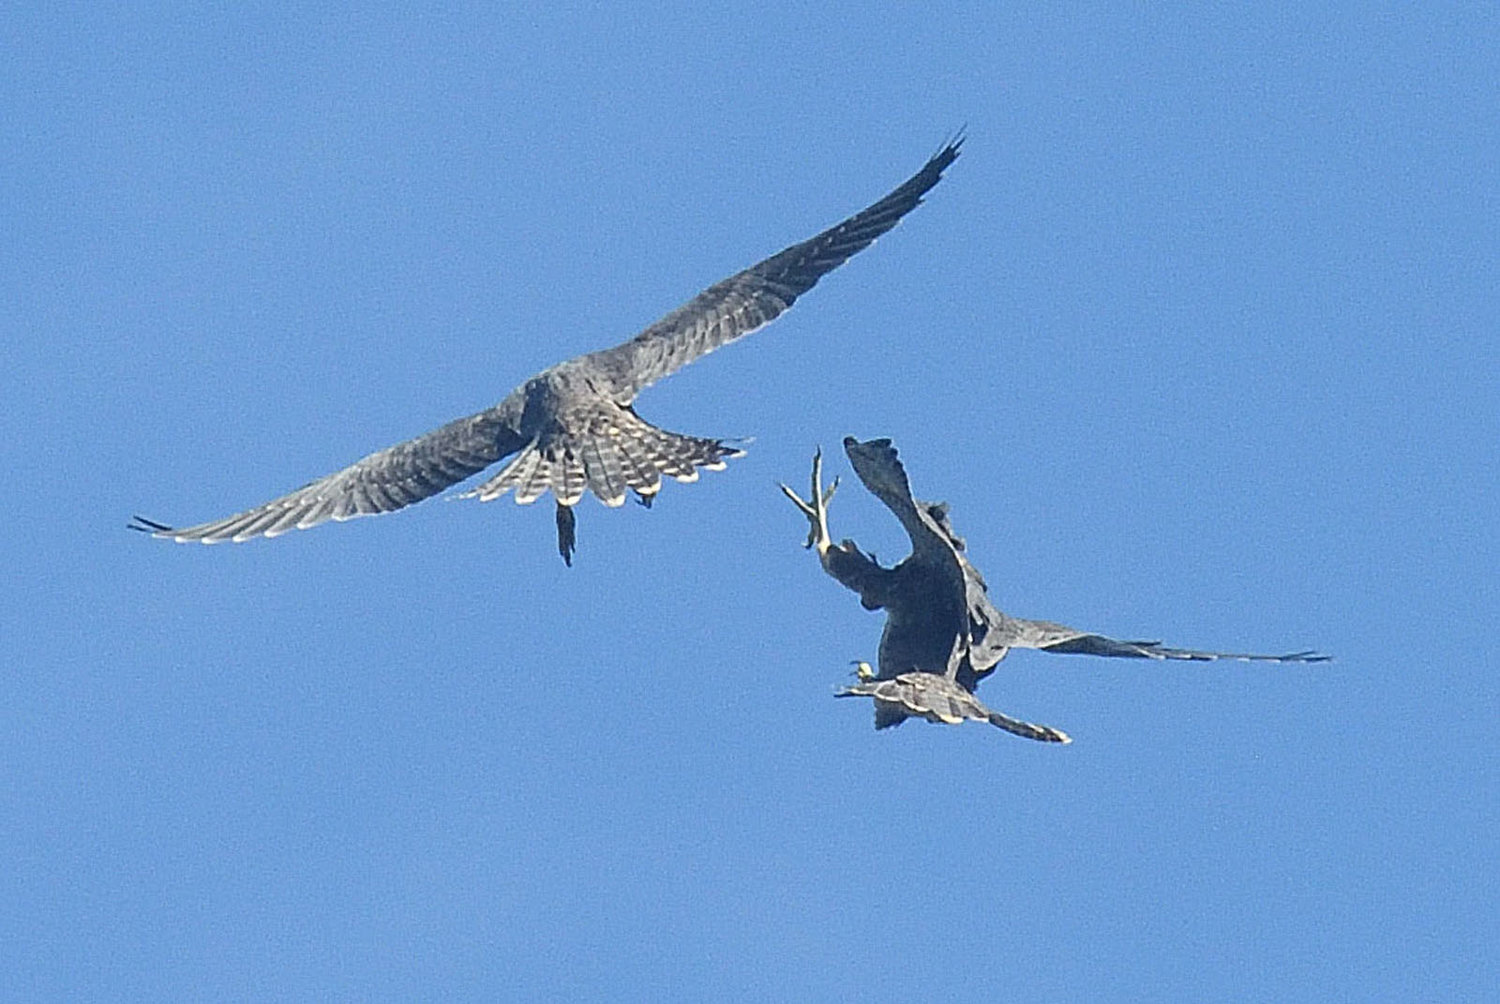 These are two fledglings of the brood cavorting through the air and displaying talons at each other. Peregrine falcons, as well as other raptors, engage in this play activity. In the process, they learn and hone the flying skills needed to survive, eat and defend future nesting territories. Peregrines specialize in catching other birds in mid-air and may enter a stoop (a dive) of over 200 mph in order to do so.......